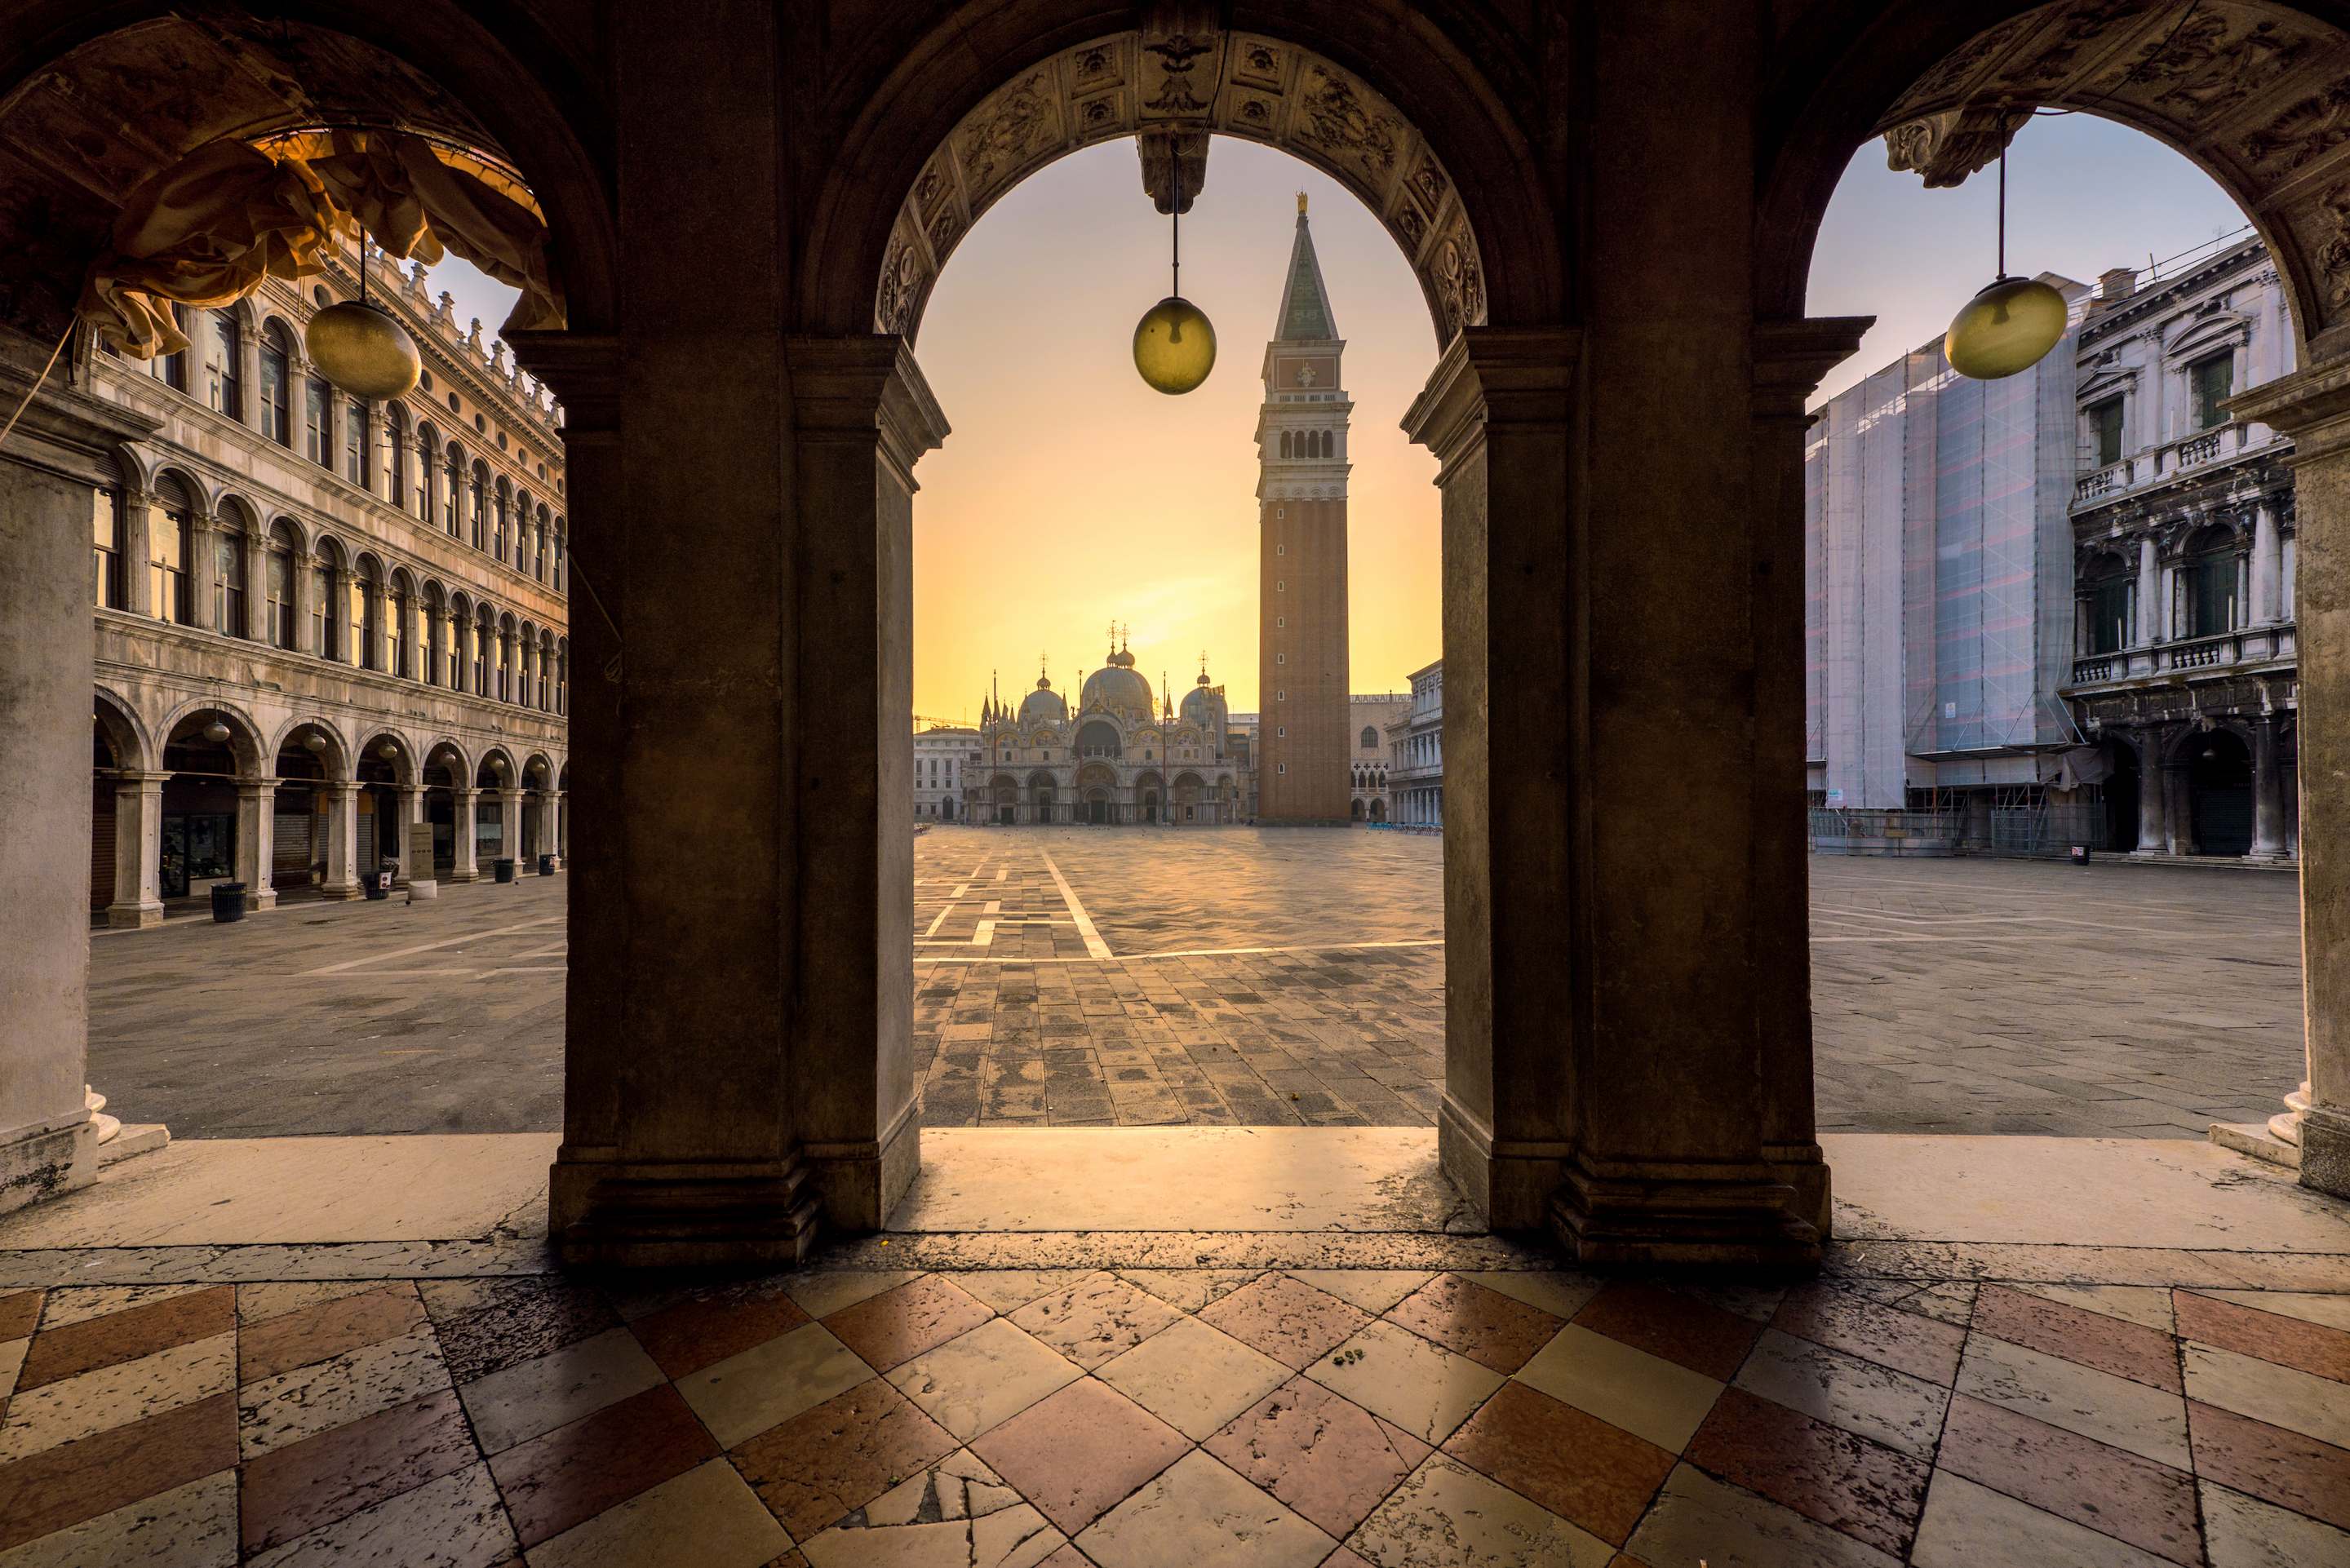 sunset at st mark's square in venice